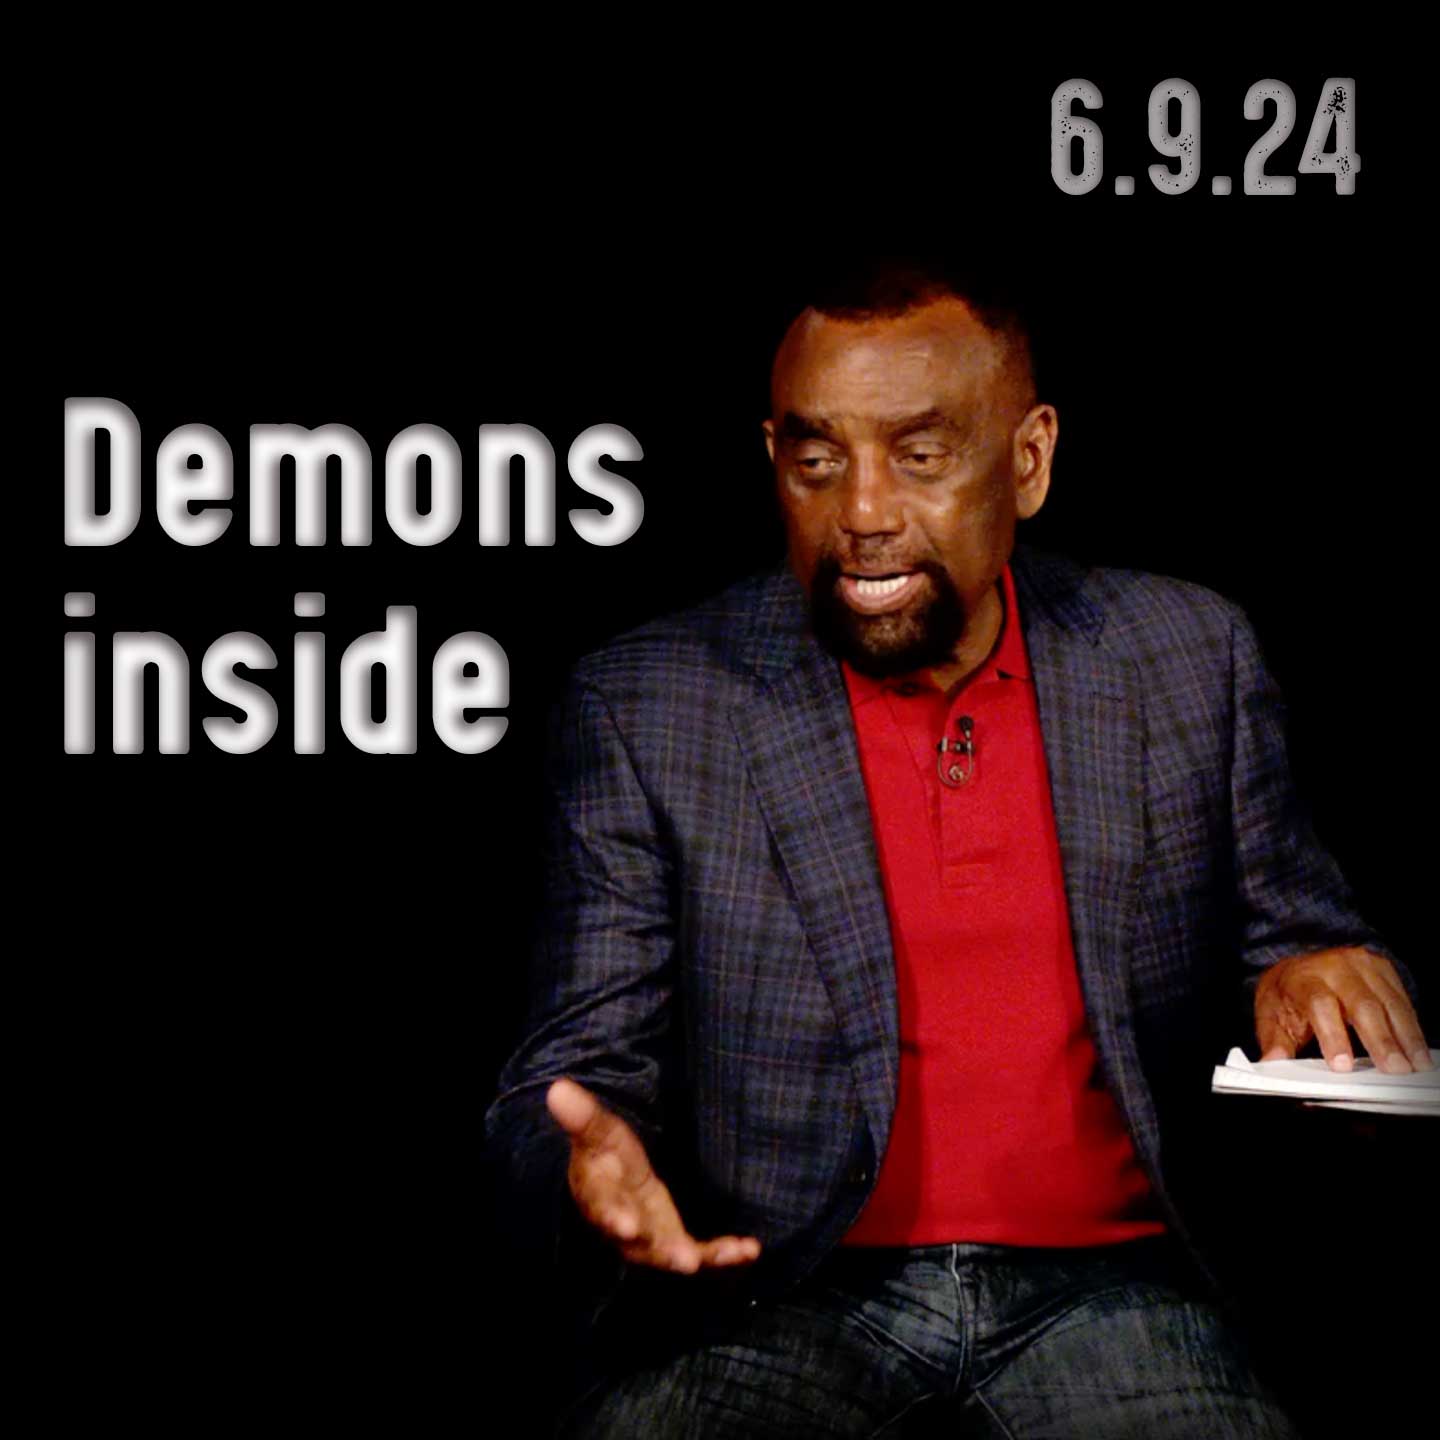 What demons do you see inside? | Church 6/9/24